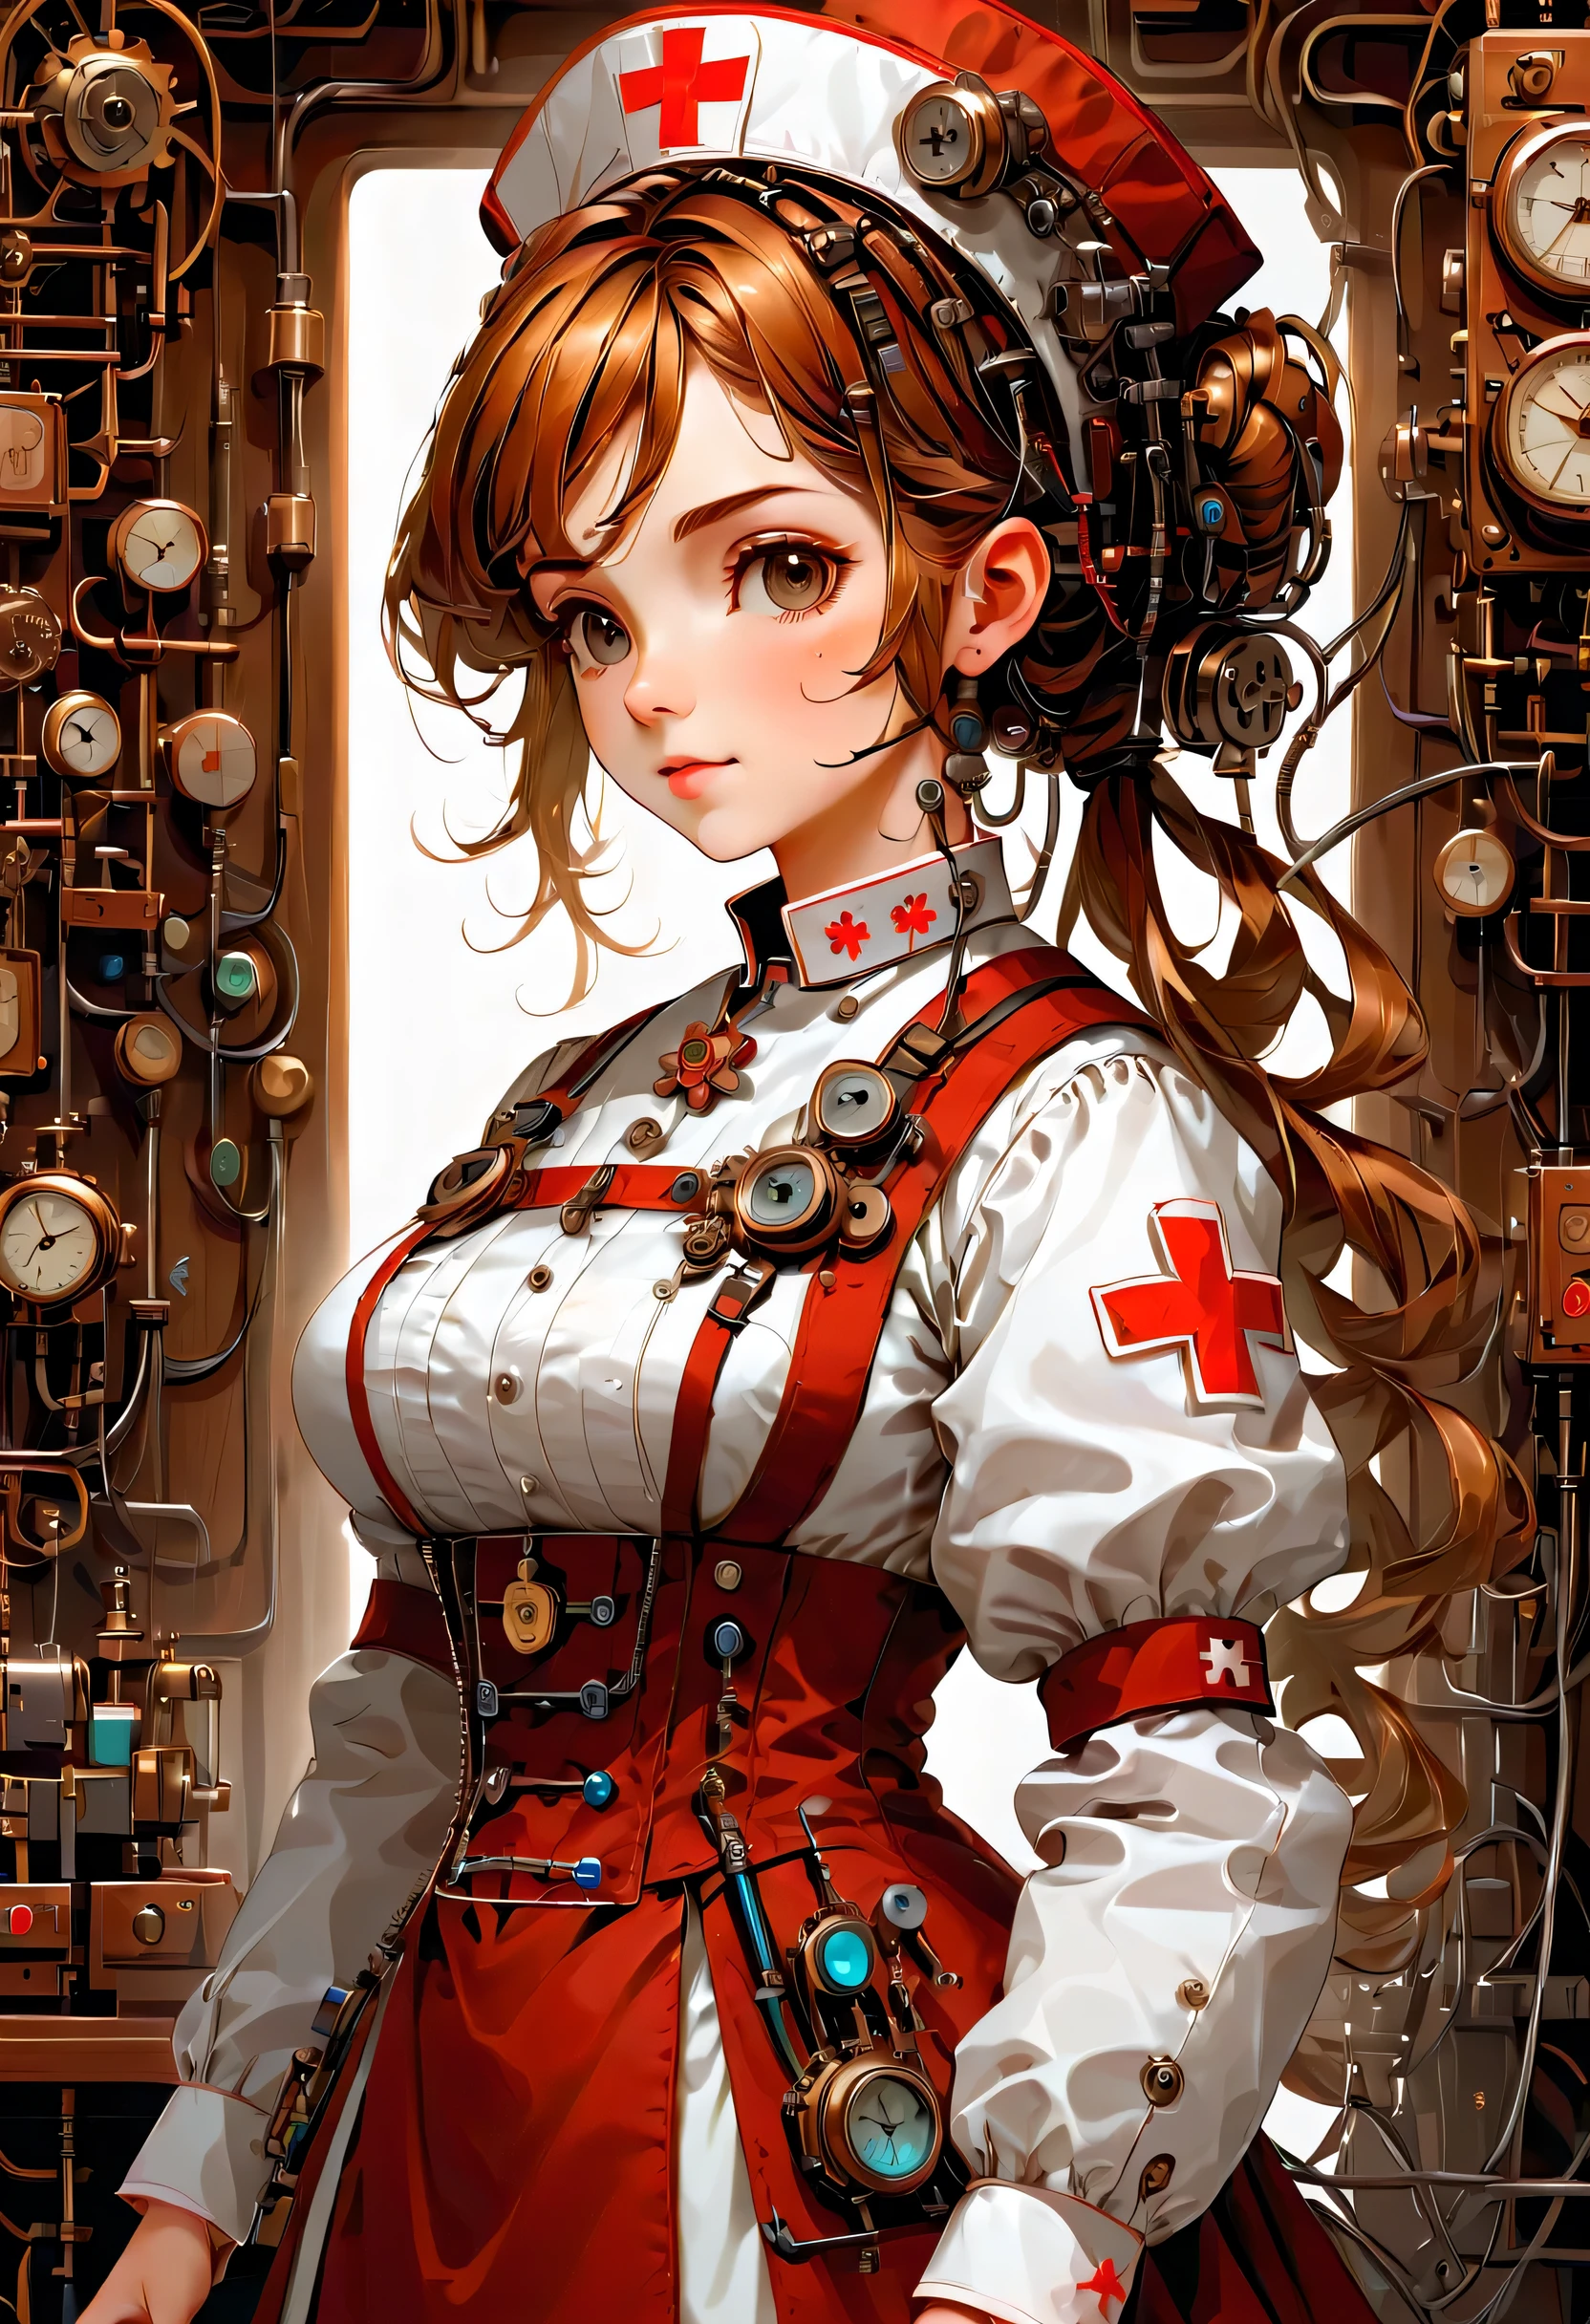 mechanism:humanoid:nurse:16th century European nurse uniform,Medical Supplies,Use electrical cords as hair ornaments,wiring,she is made of machinery,Steampunk element,Mechanical engineering,Mechanically,Mechanical,pop,cute,Equipment,shaft,intricate details,very fine,High resolution,high quality,最high quality,clearly,Be clear,beautiful light and shadow,Three dimensions,adorable appearance,complex configuration,mechanism,dynamic,busy,Work hard,An expression that makes you want to support,